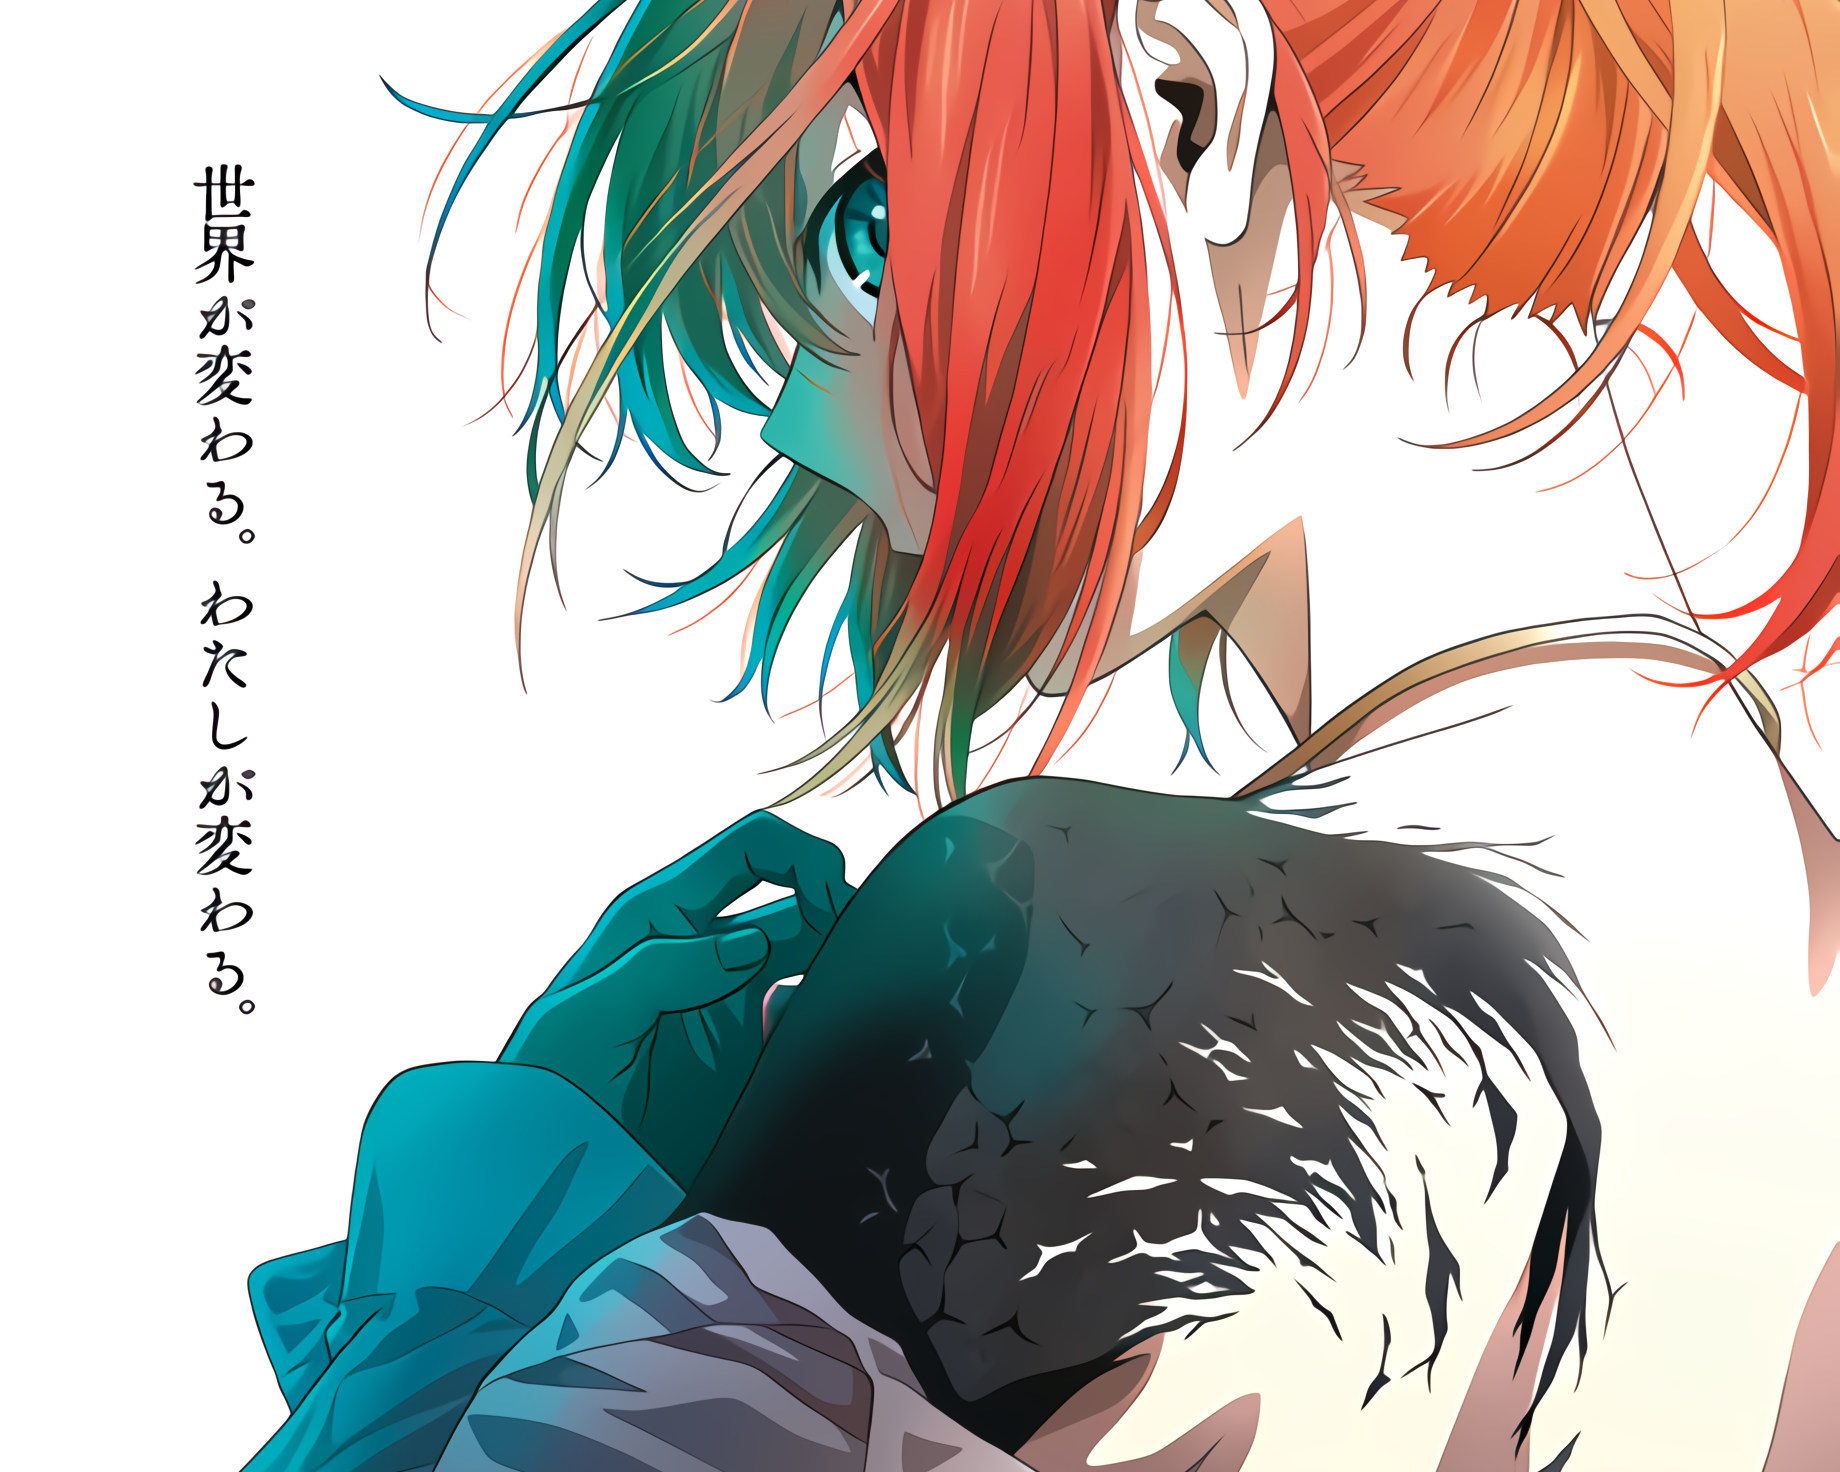 Ancient Magus' Bride Anime Series Finally Gets A 2nd Season, coming April 2023